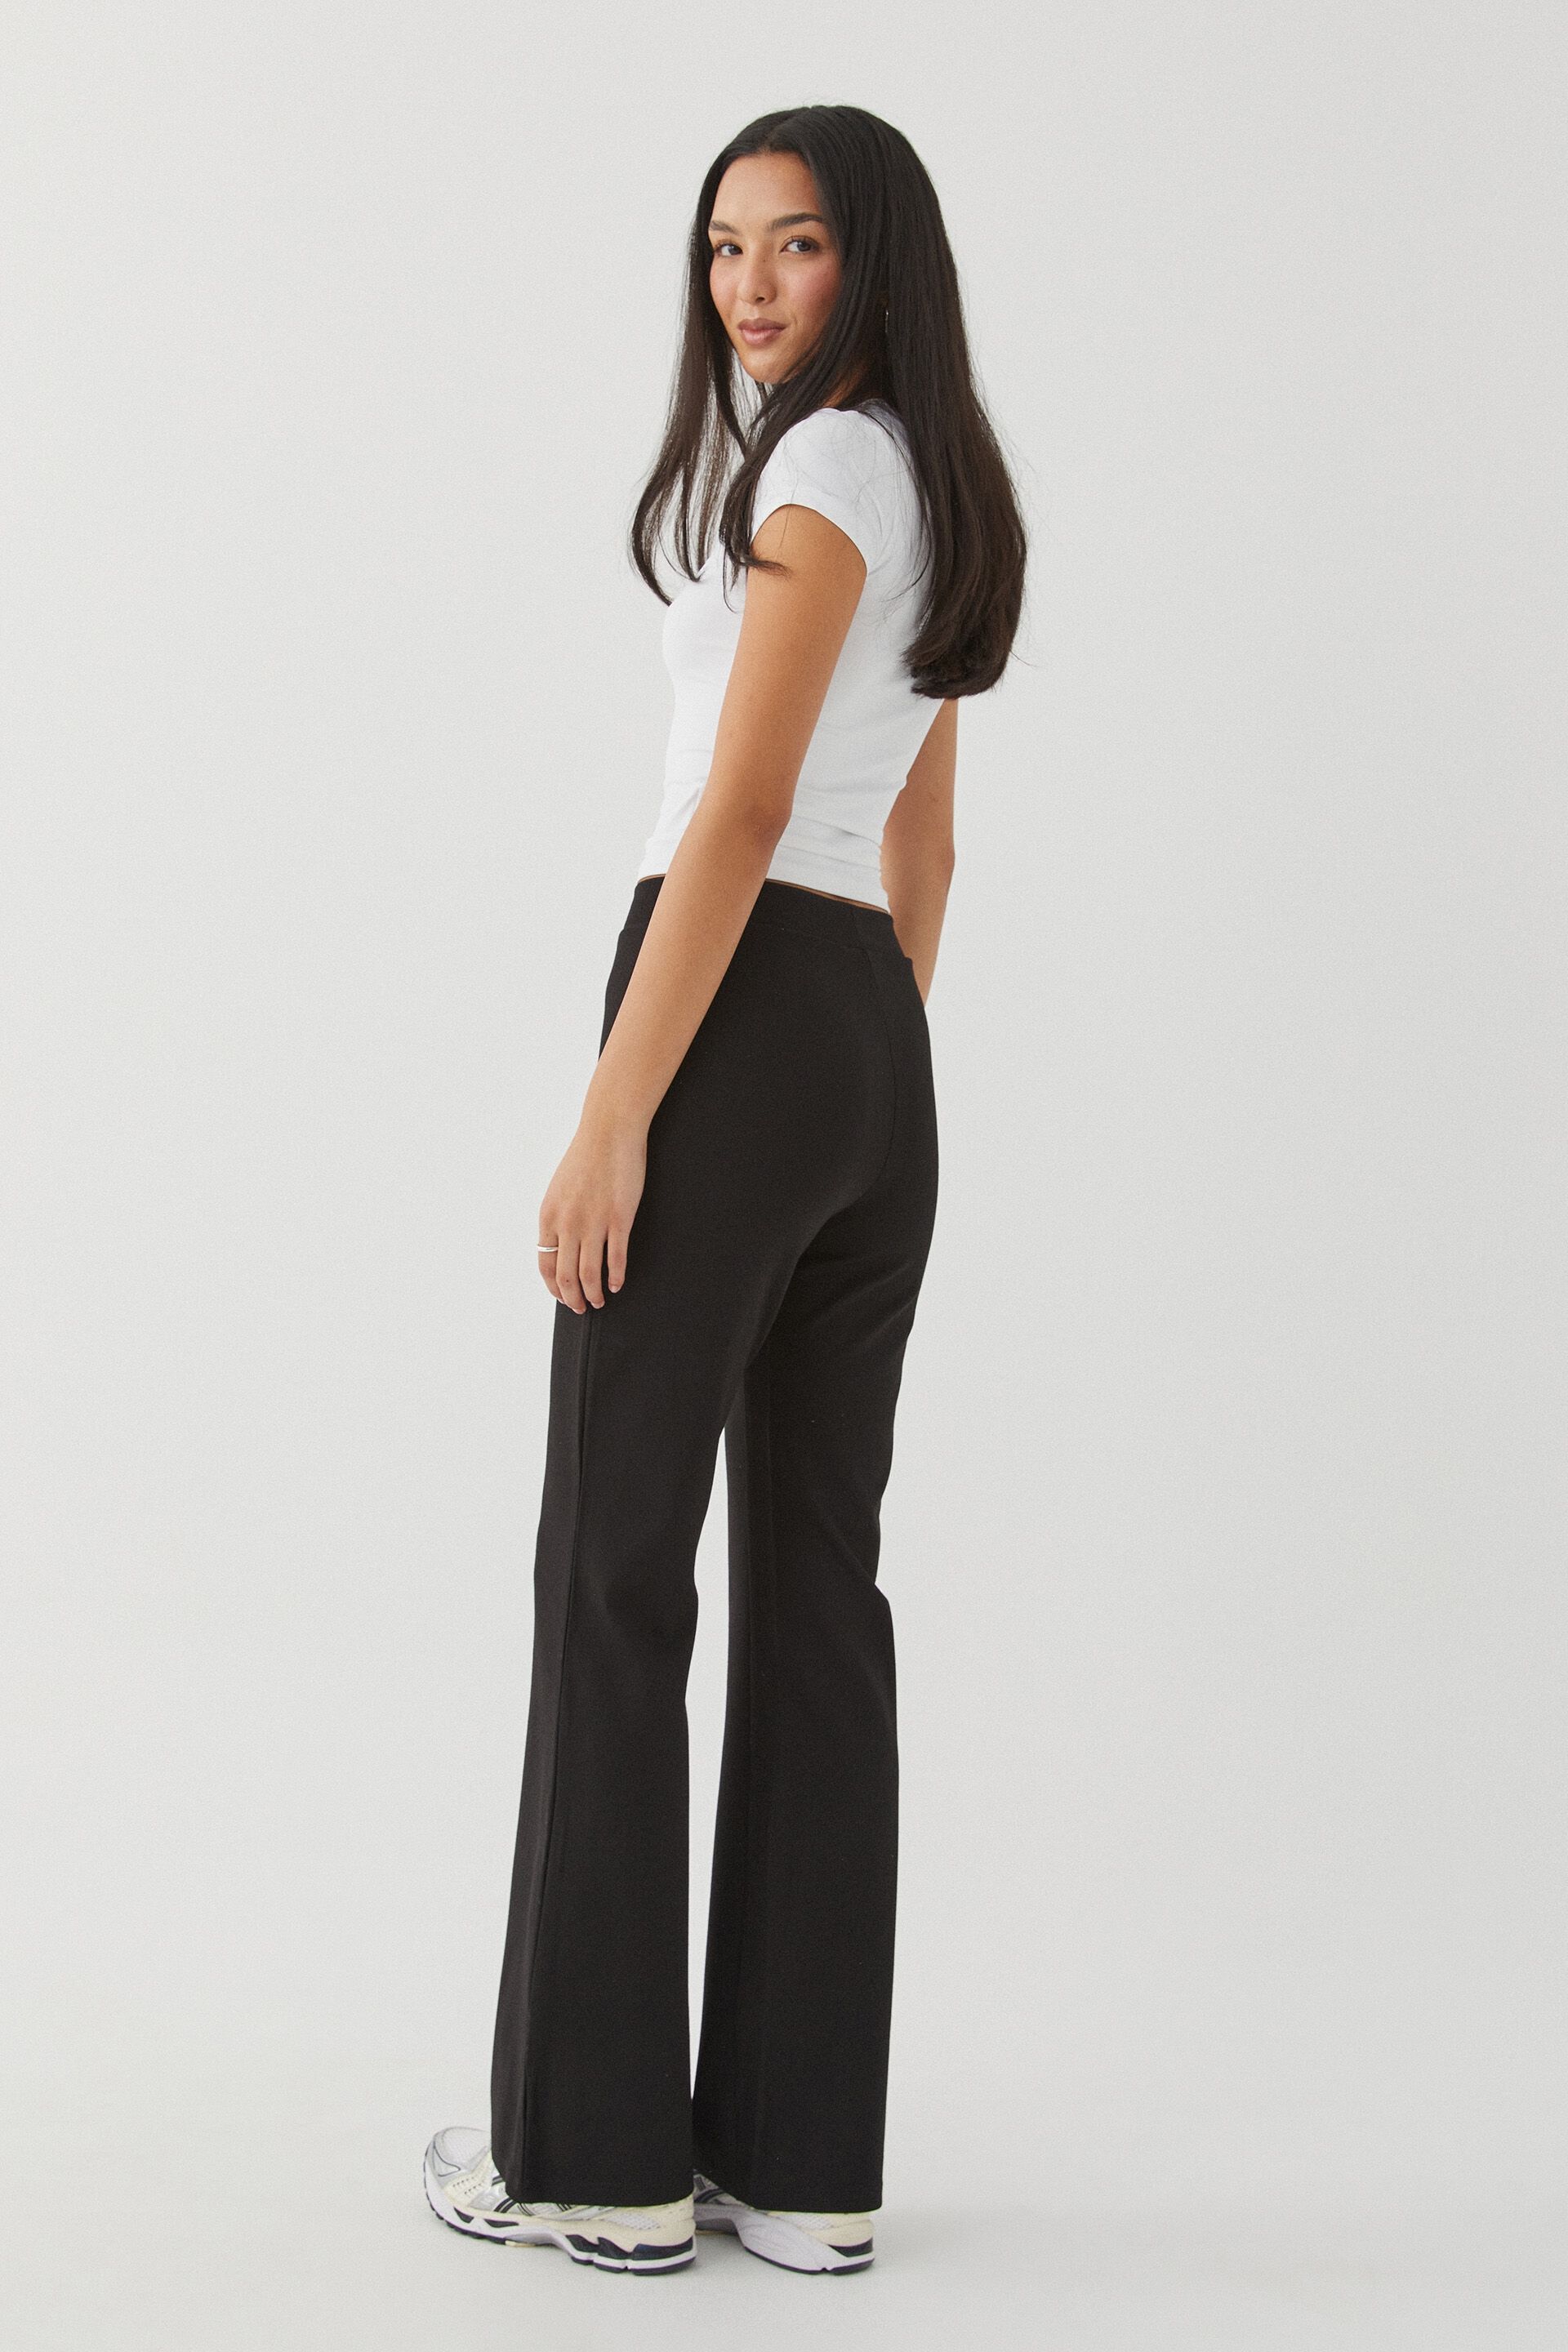 Buy AND Black Solid Rayon Flared Fit Women's Casual Pants | Shoppers Stop